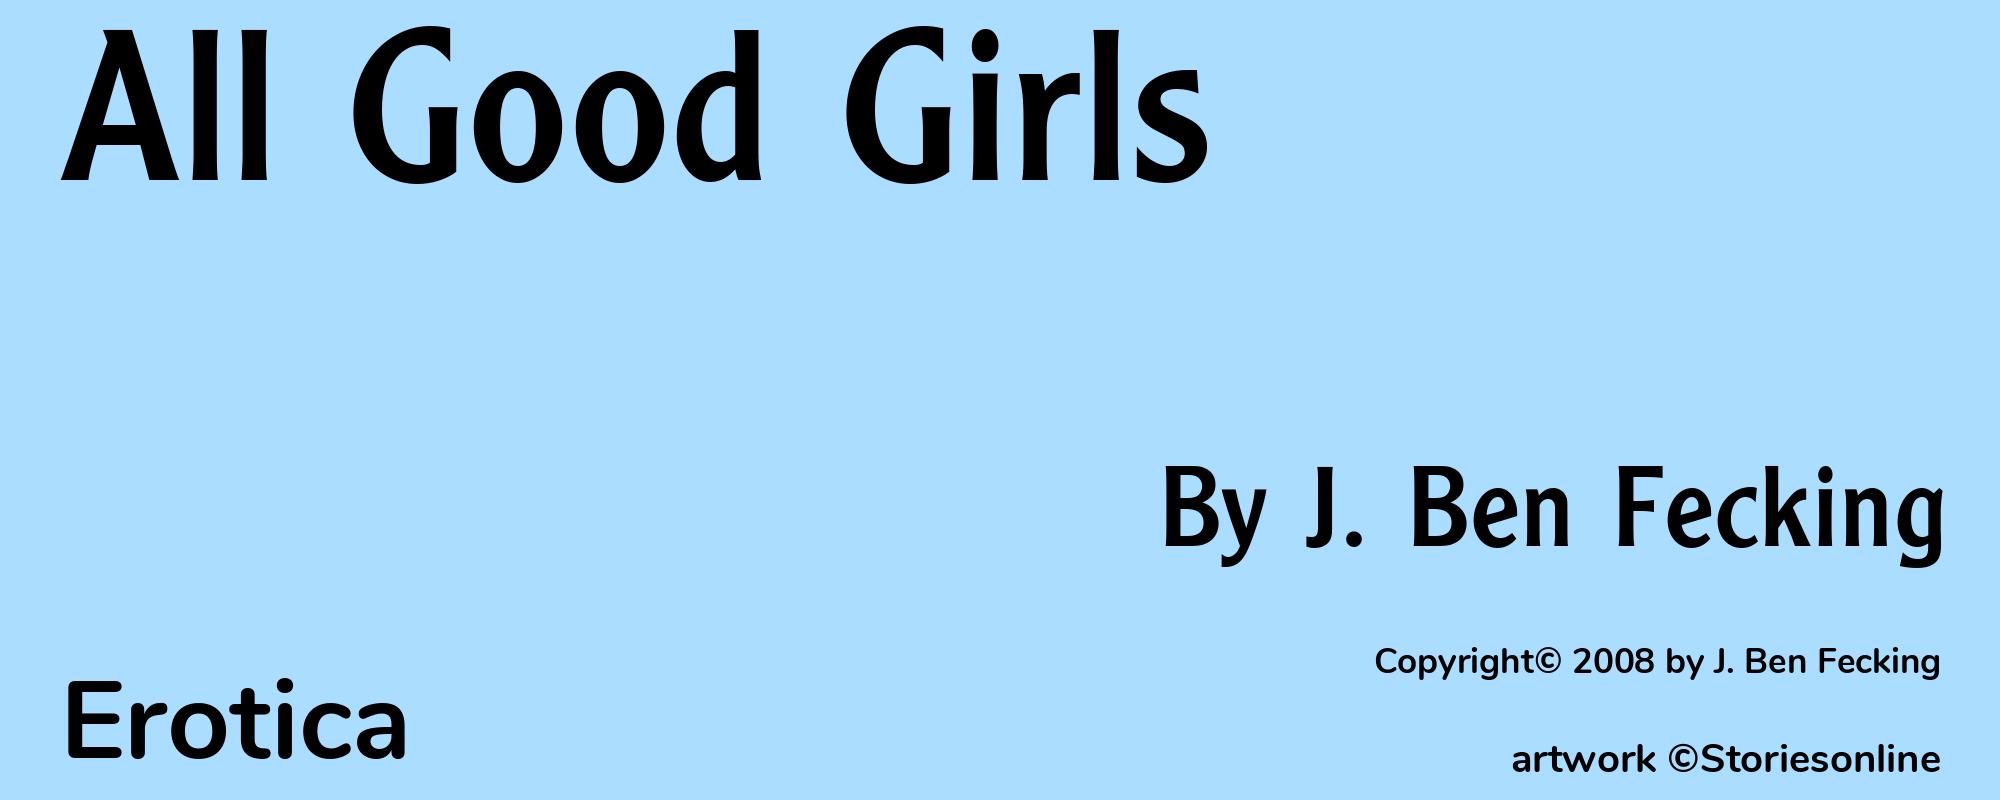 All Good Girls - Cover